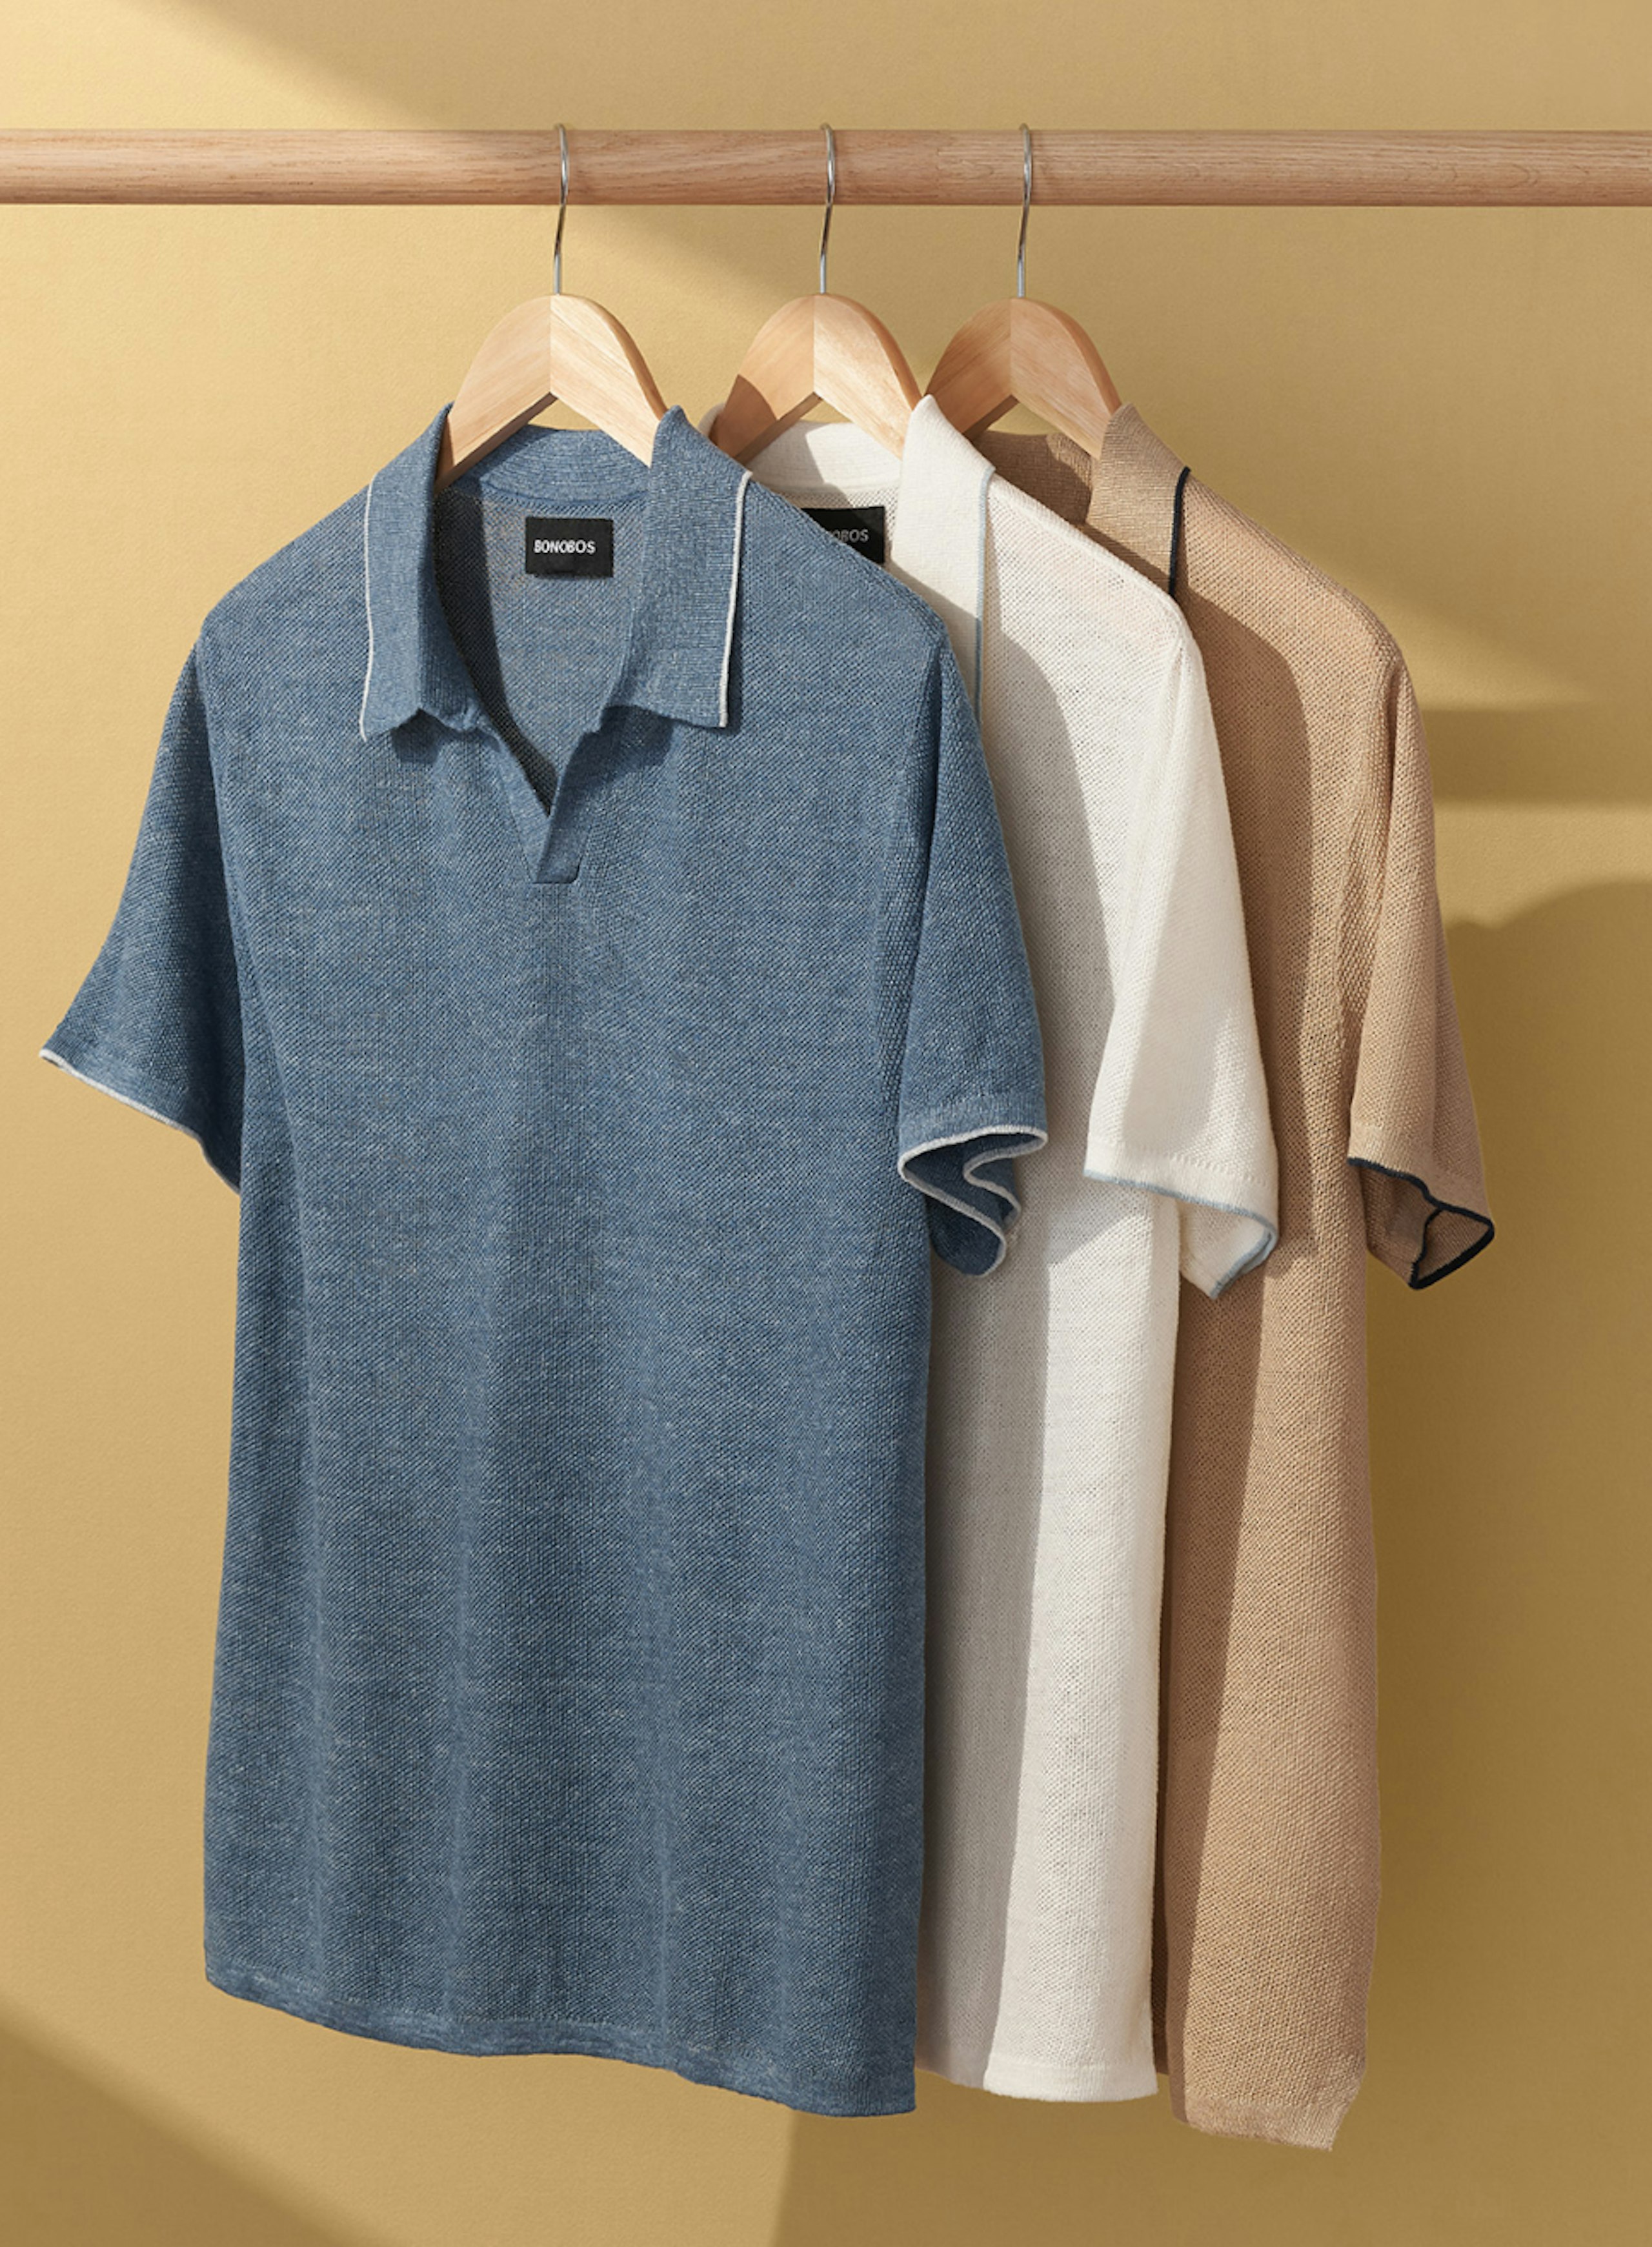 3 polo shirts hanging on a wooden rod 